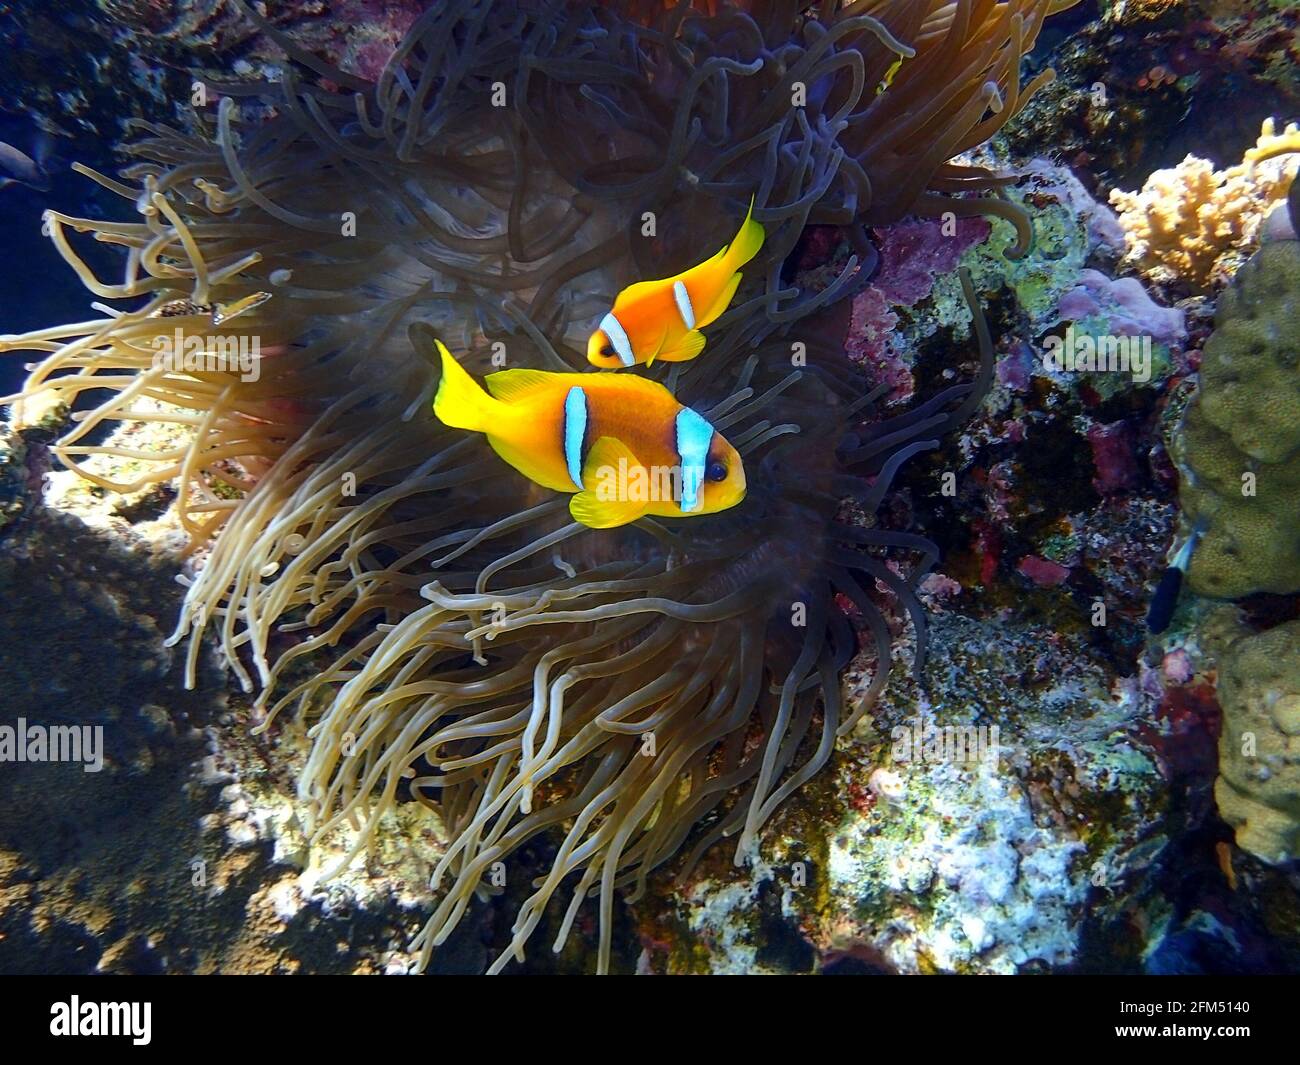 Two orange clownfish (Anemone fish) in anemone soft coral. Pair of bright striped marine tropical fish in natural habitat in Red Sea, Egypt. Amazing s Stock Photo